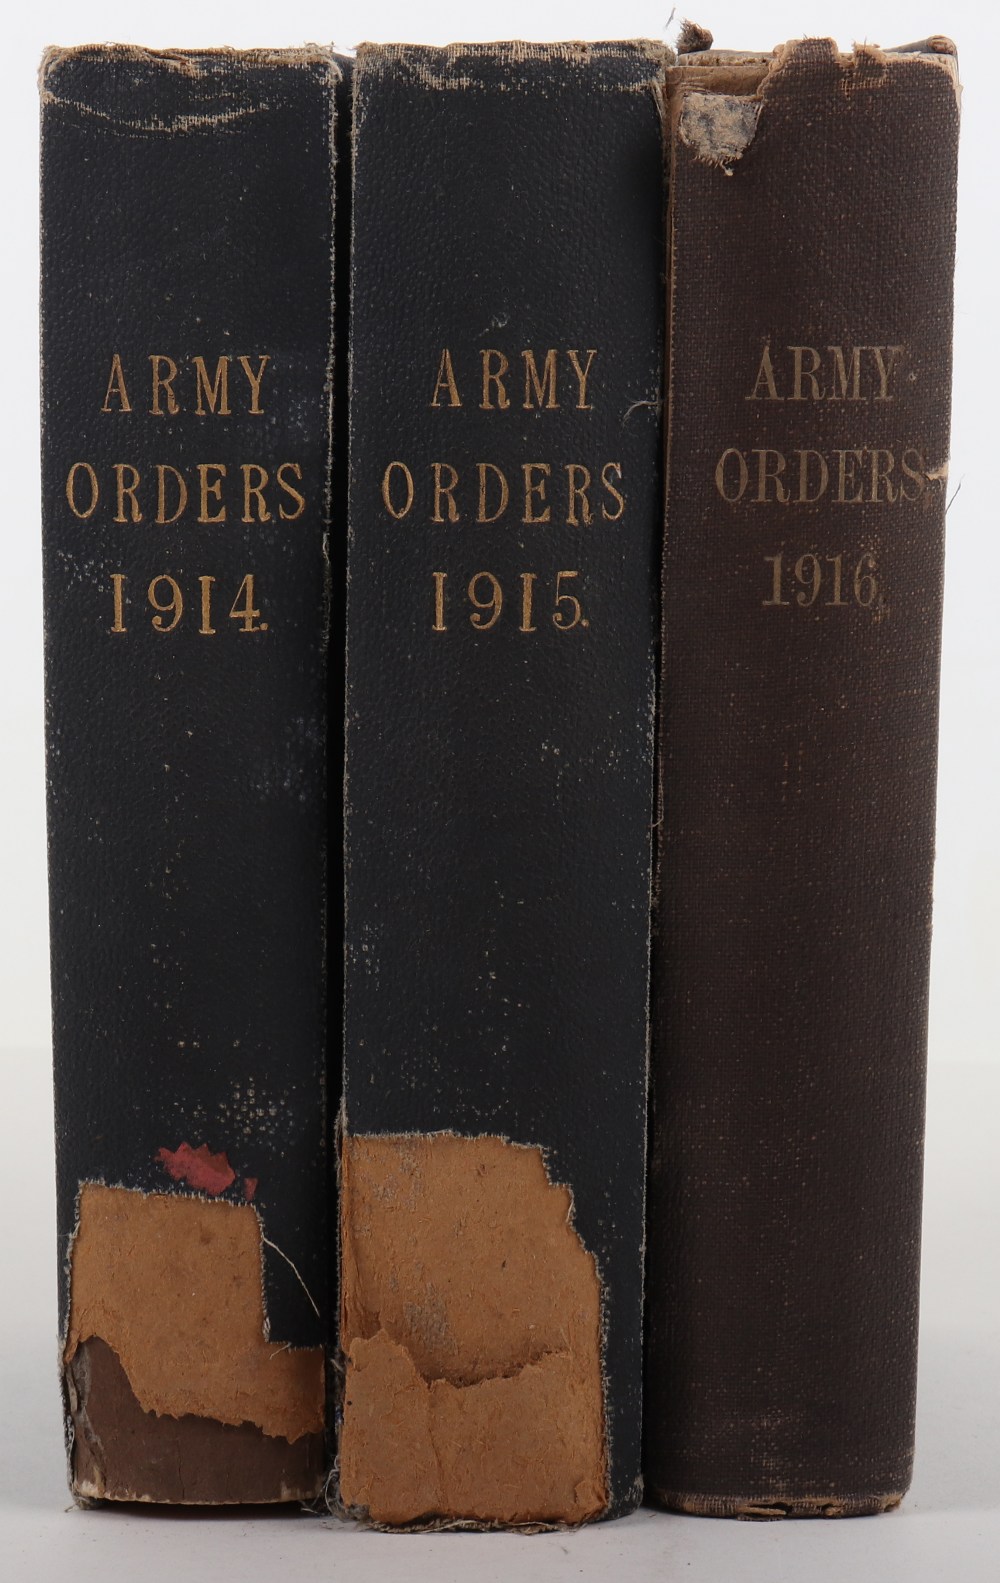 Army Orders for 1914, 1915 & 1916